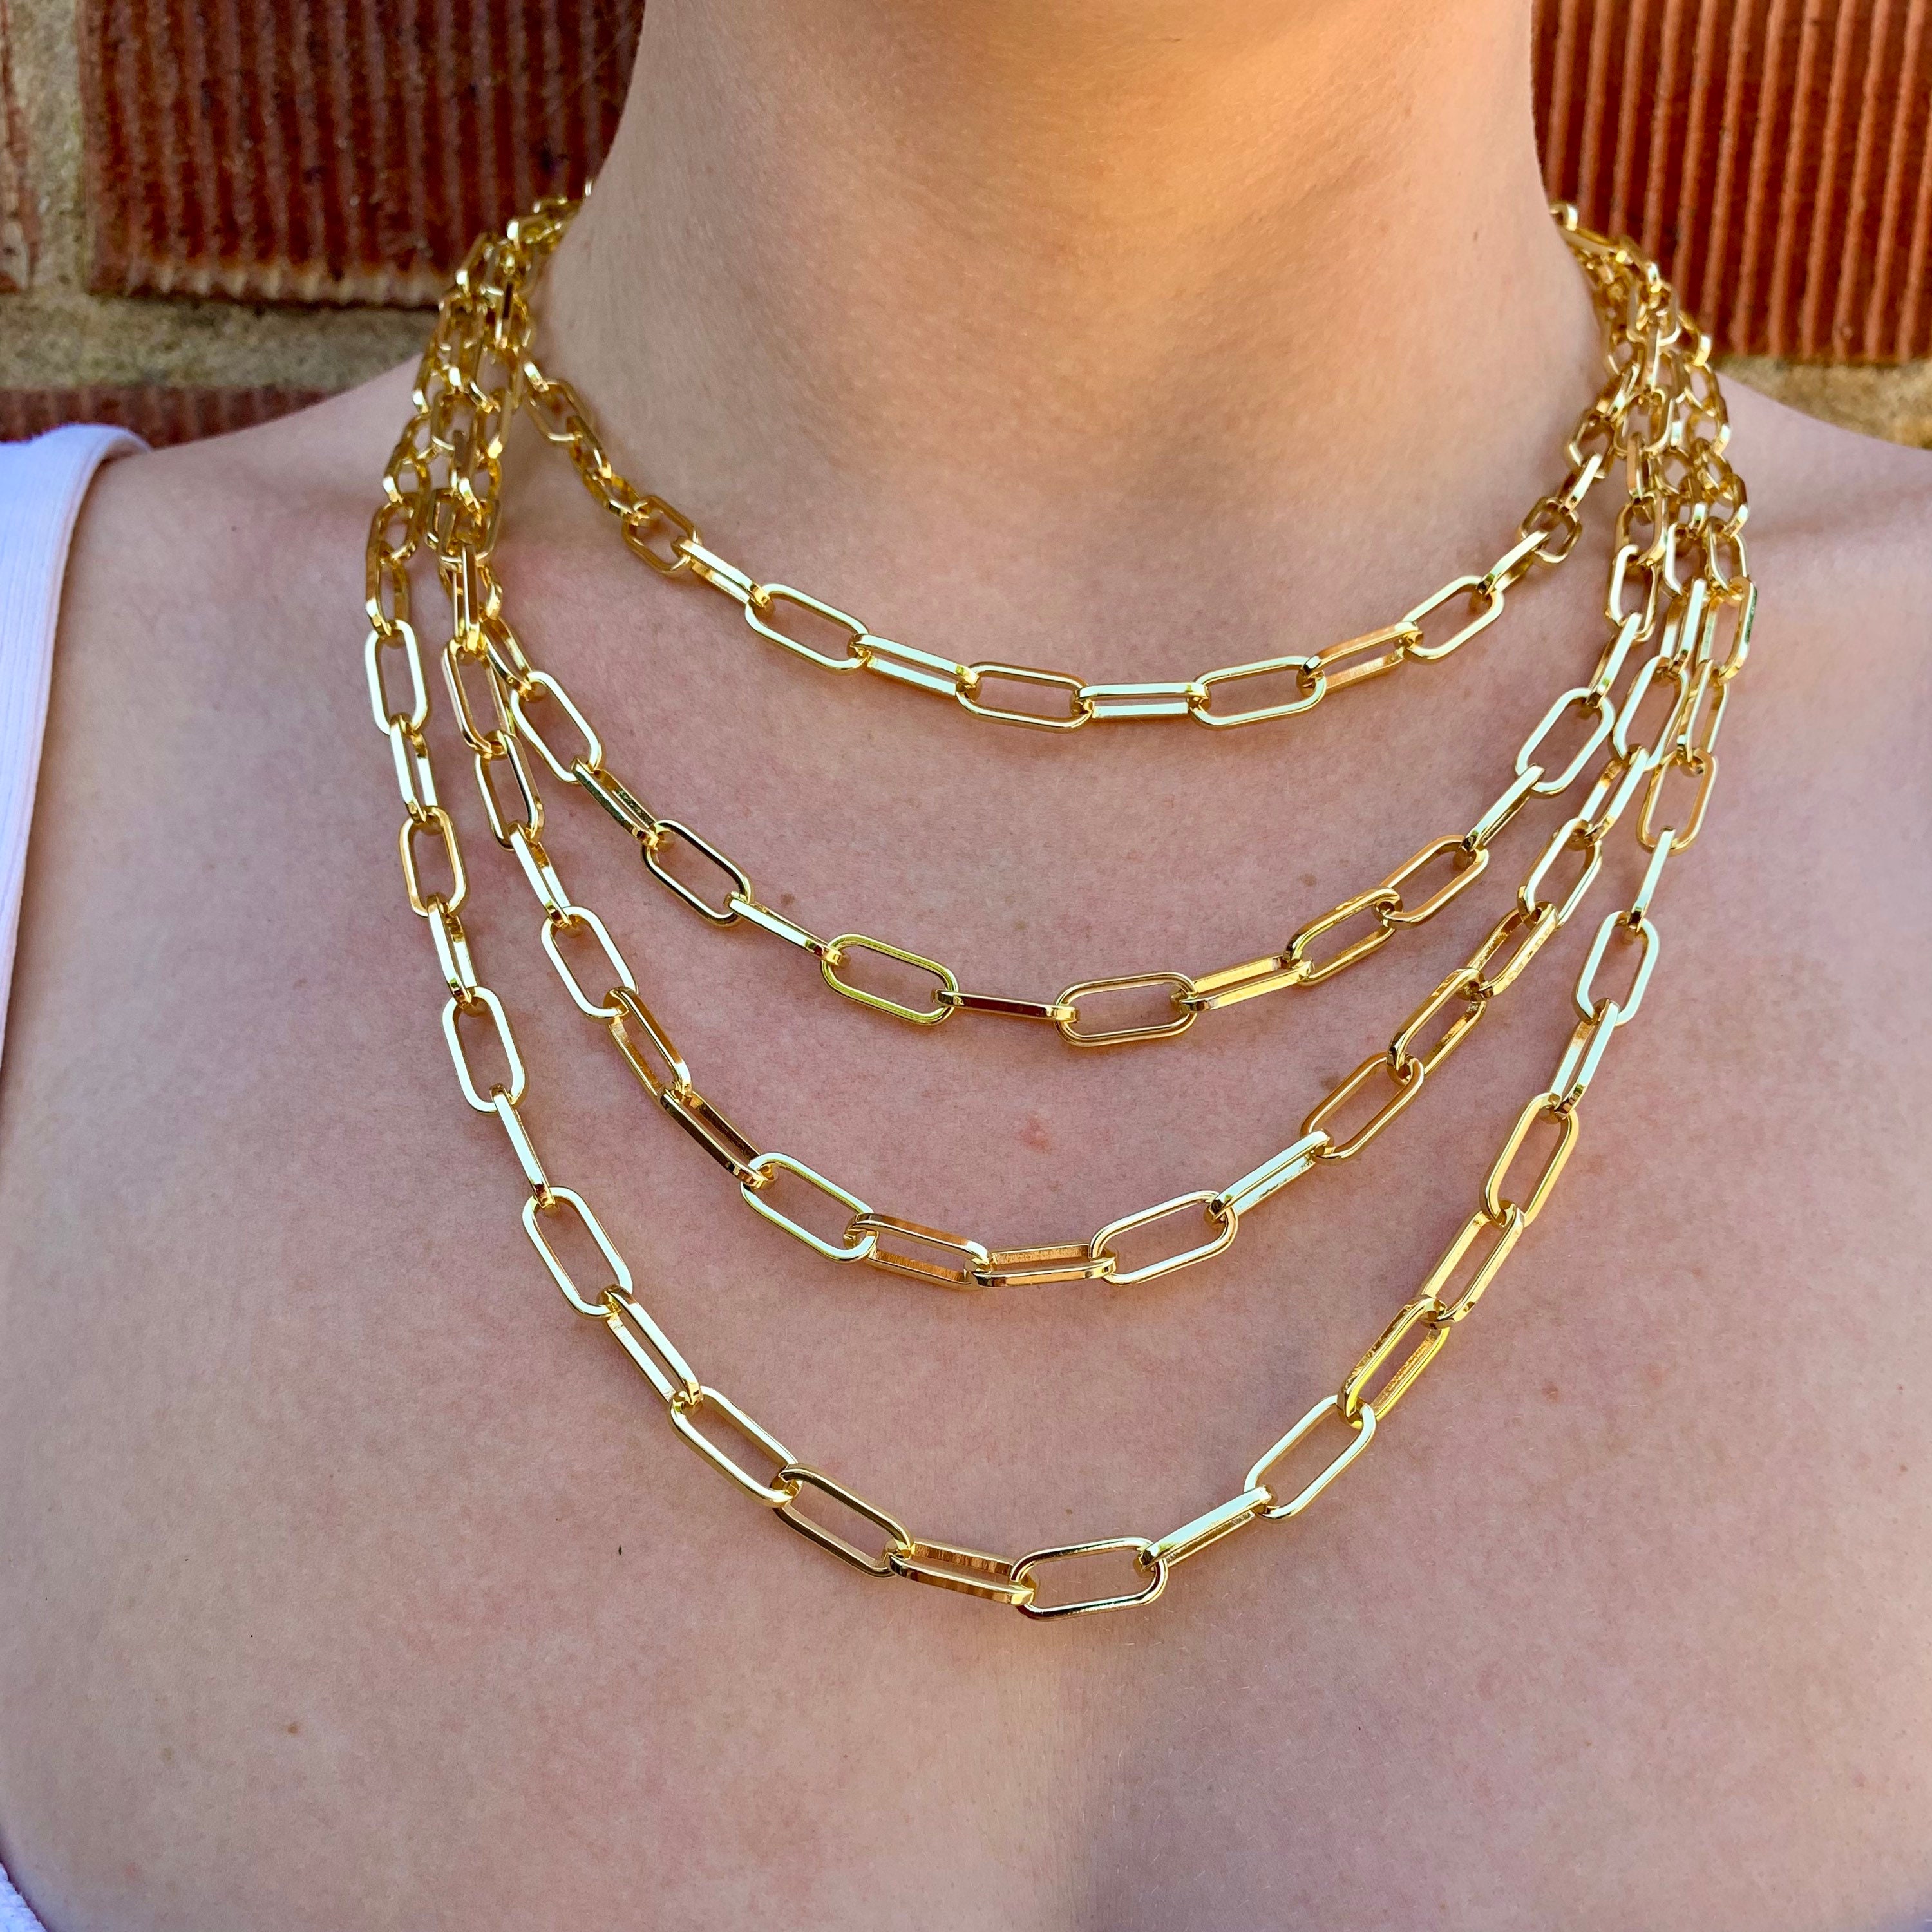 Paperclip Chain Necklace Adjustable 46cm/18' in 14k Solid Gold 